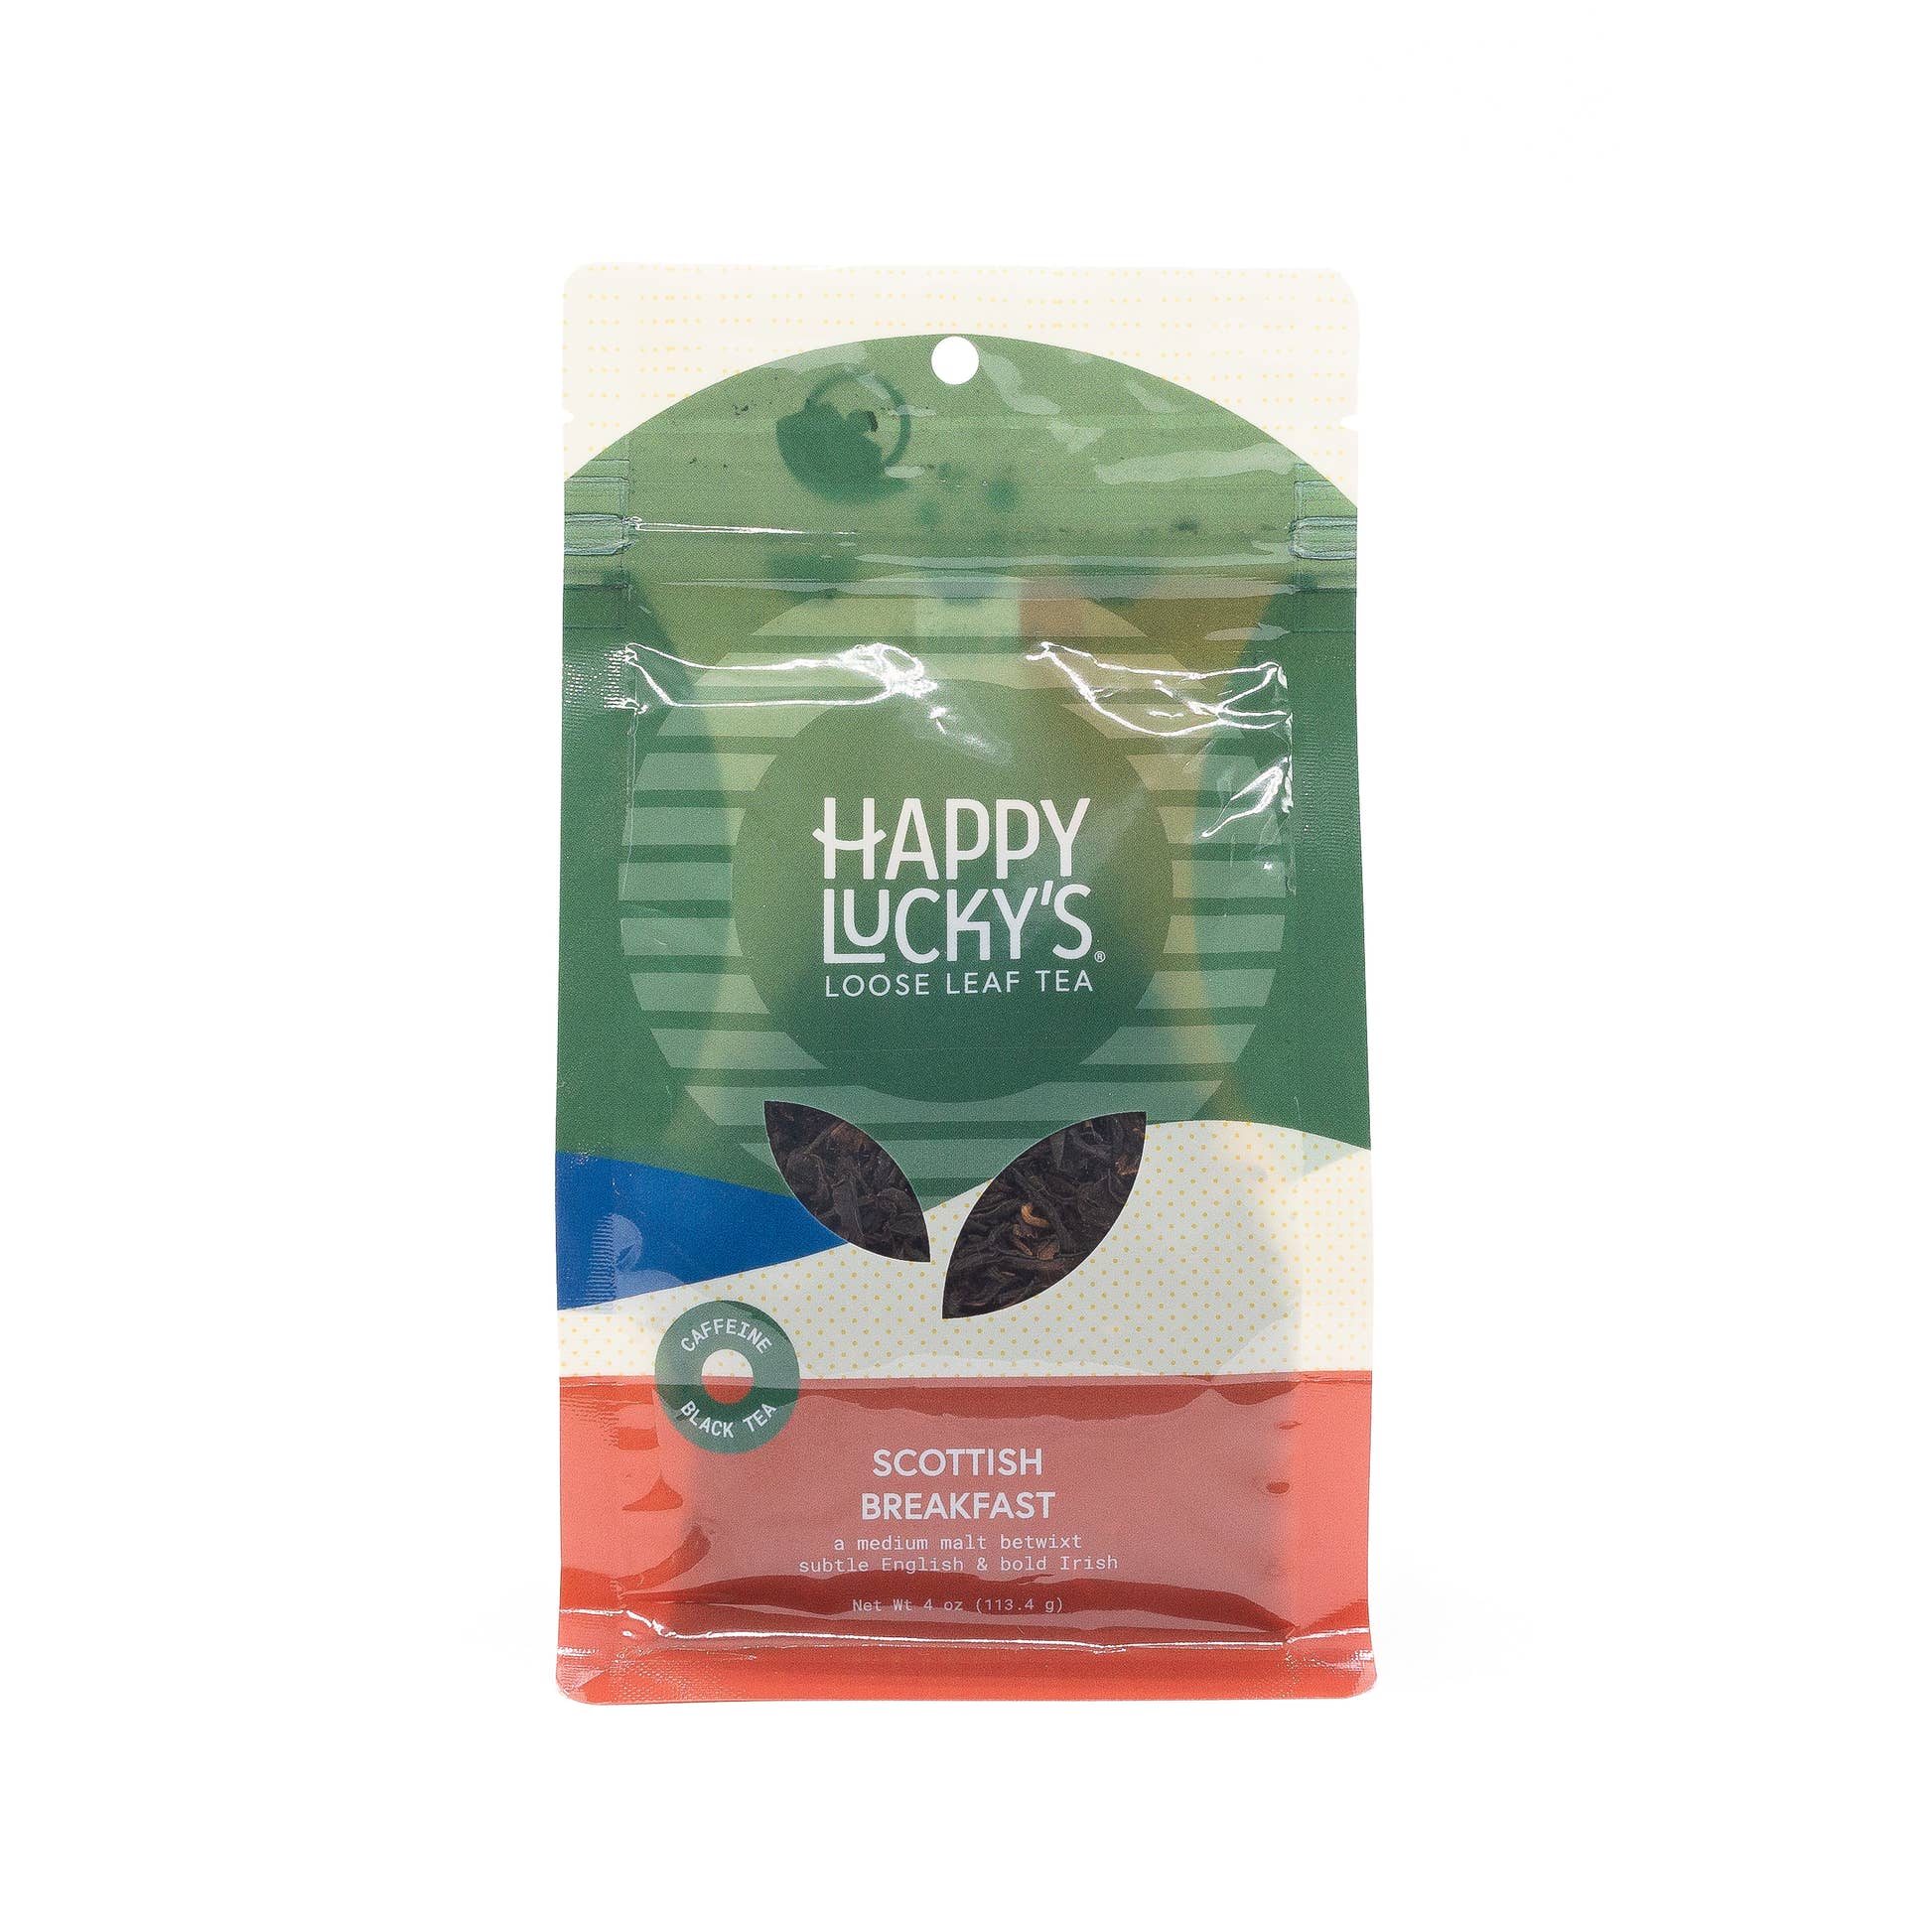 Scottish Breakfast by Happy Lucky's loose leaf tea package